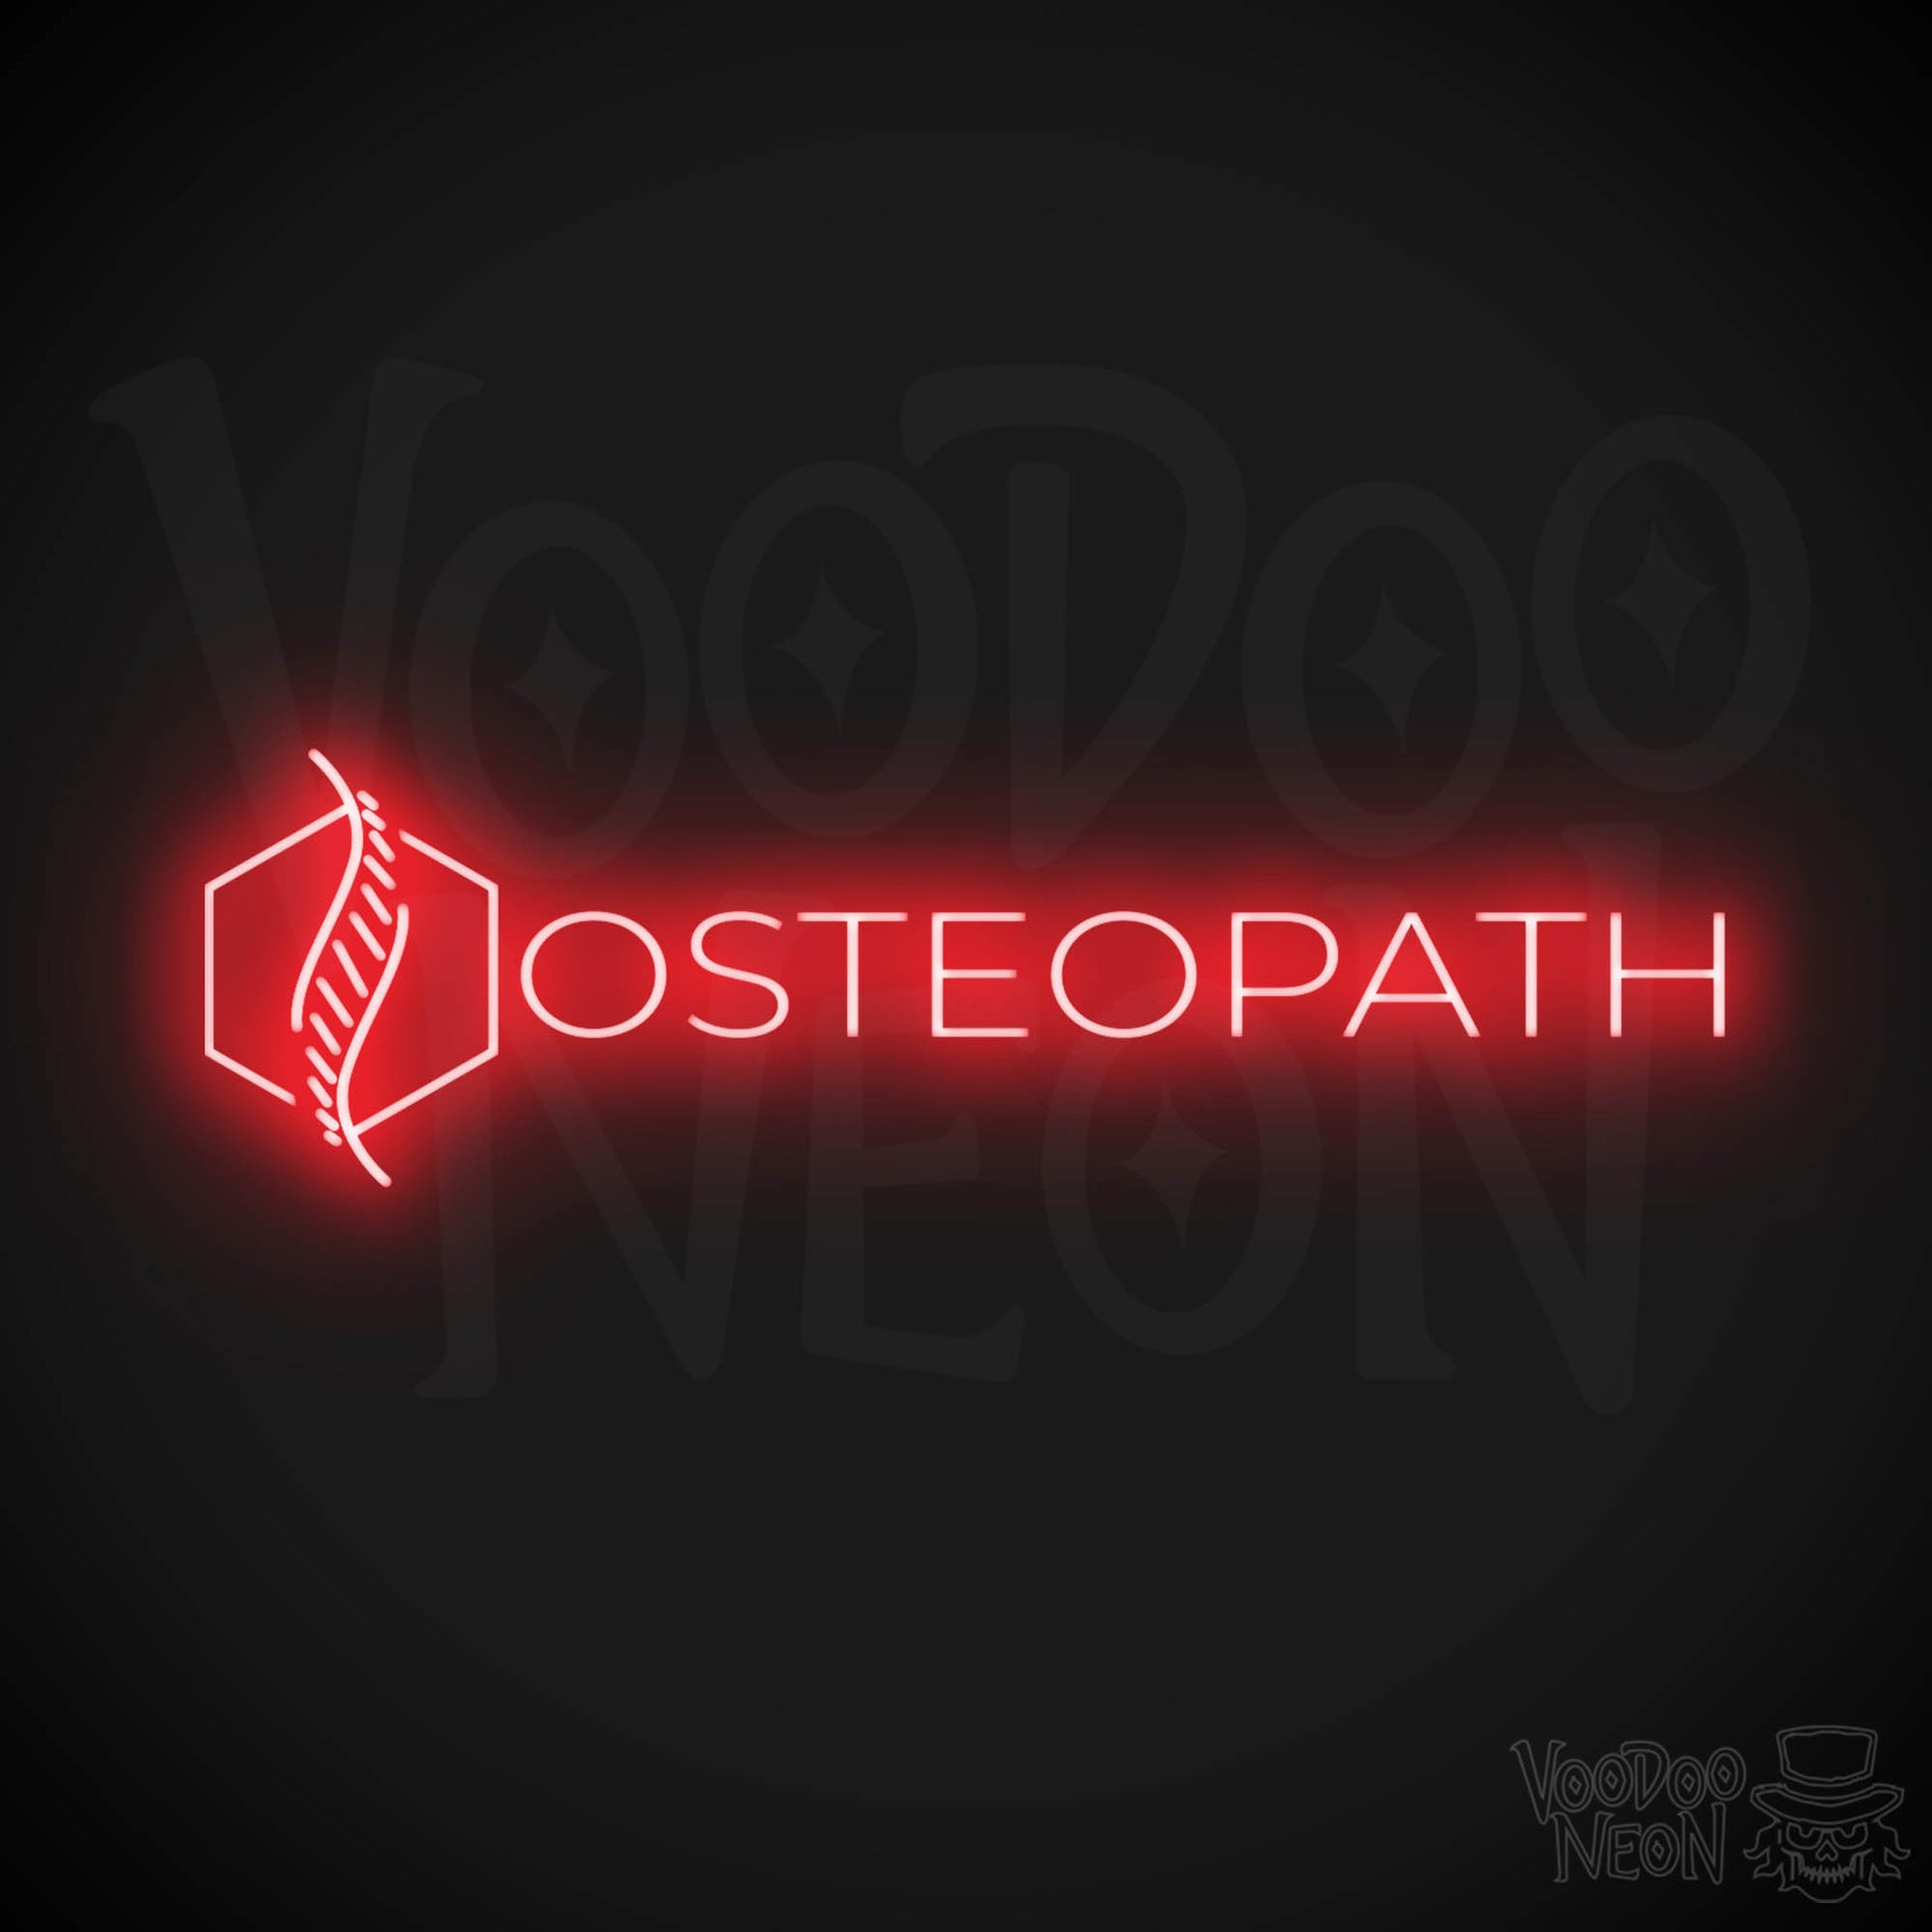 Osteopath LED Neon - Red